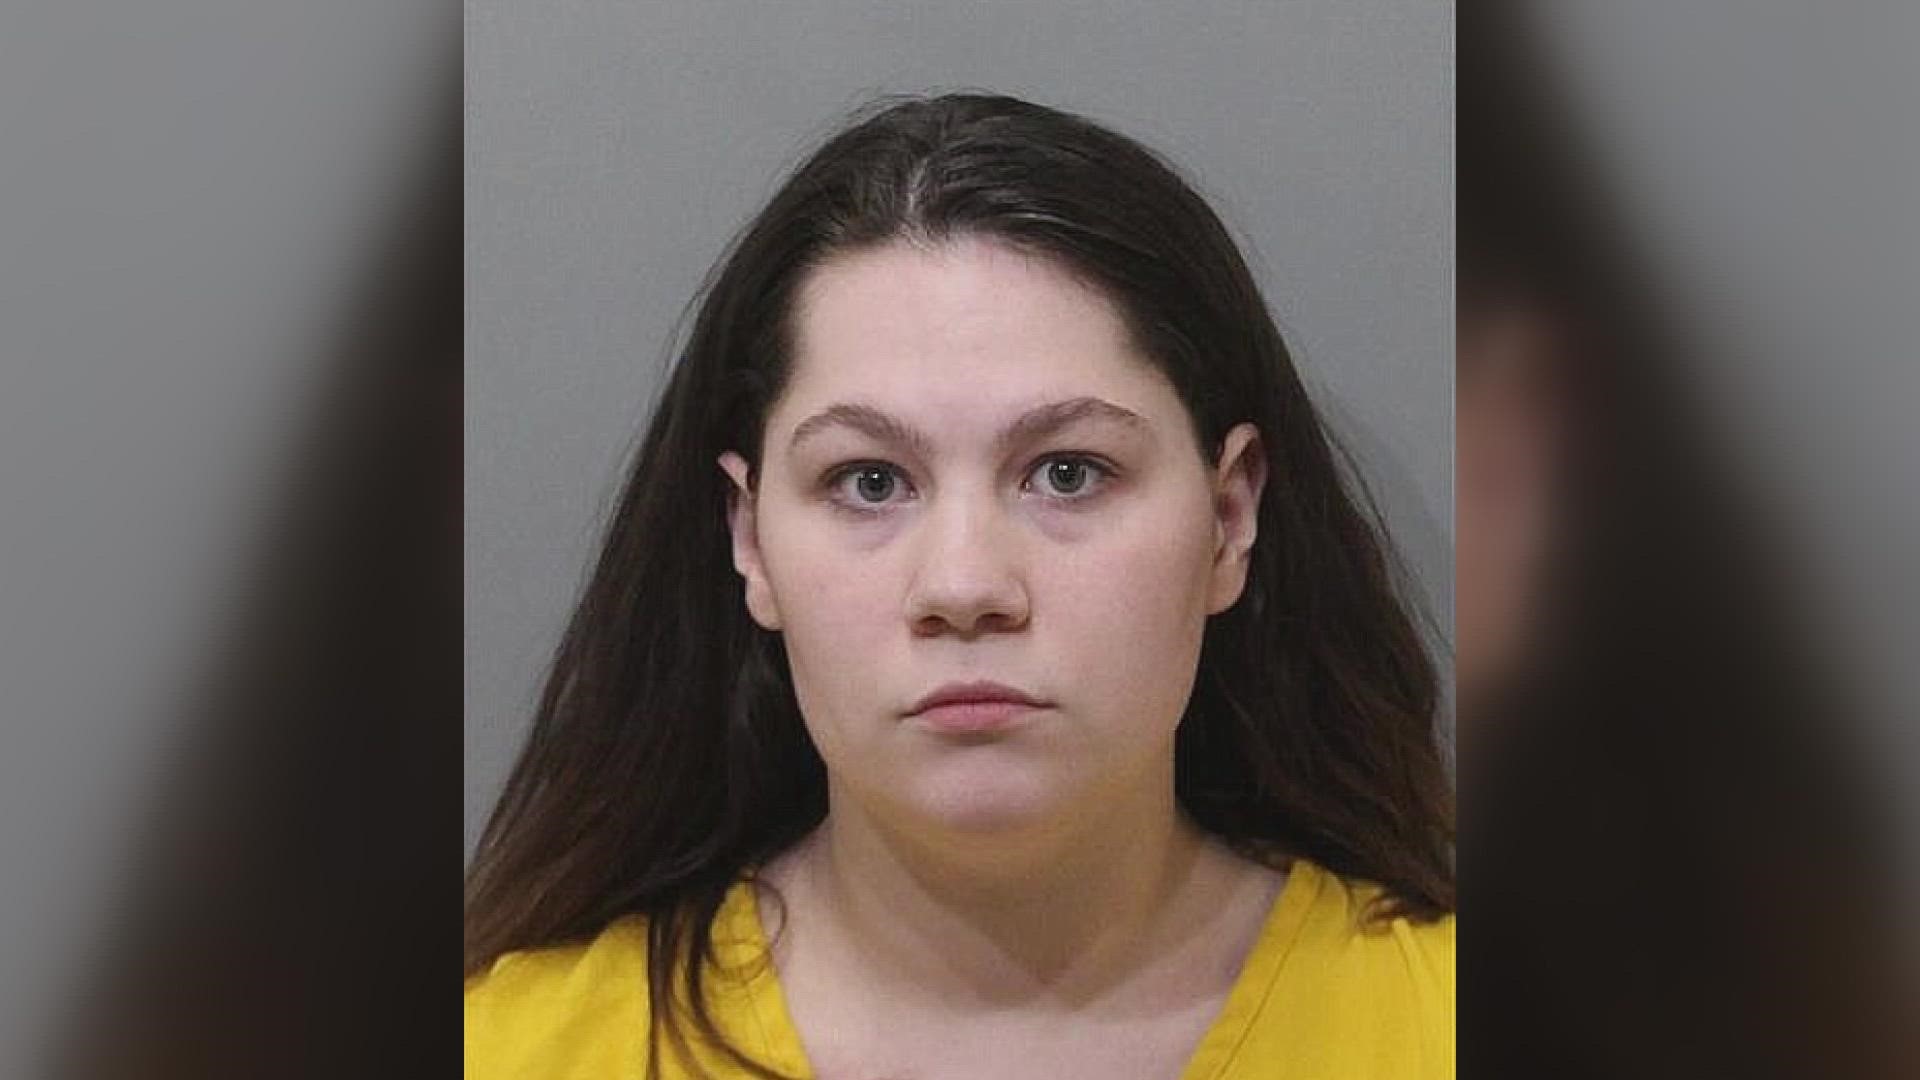 Hailey N. Harris, 26, pleaded guilty in March to felony injury to a child for her role in what prosecutors called “heinous” abuse of a 7-week-old girl.